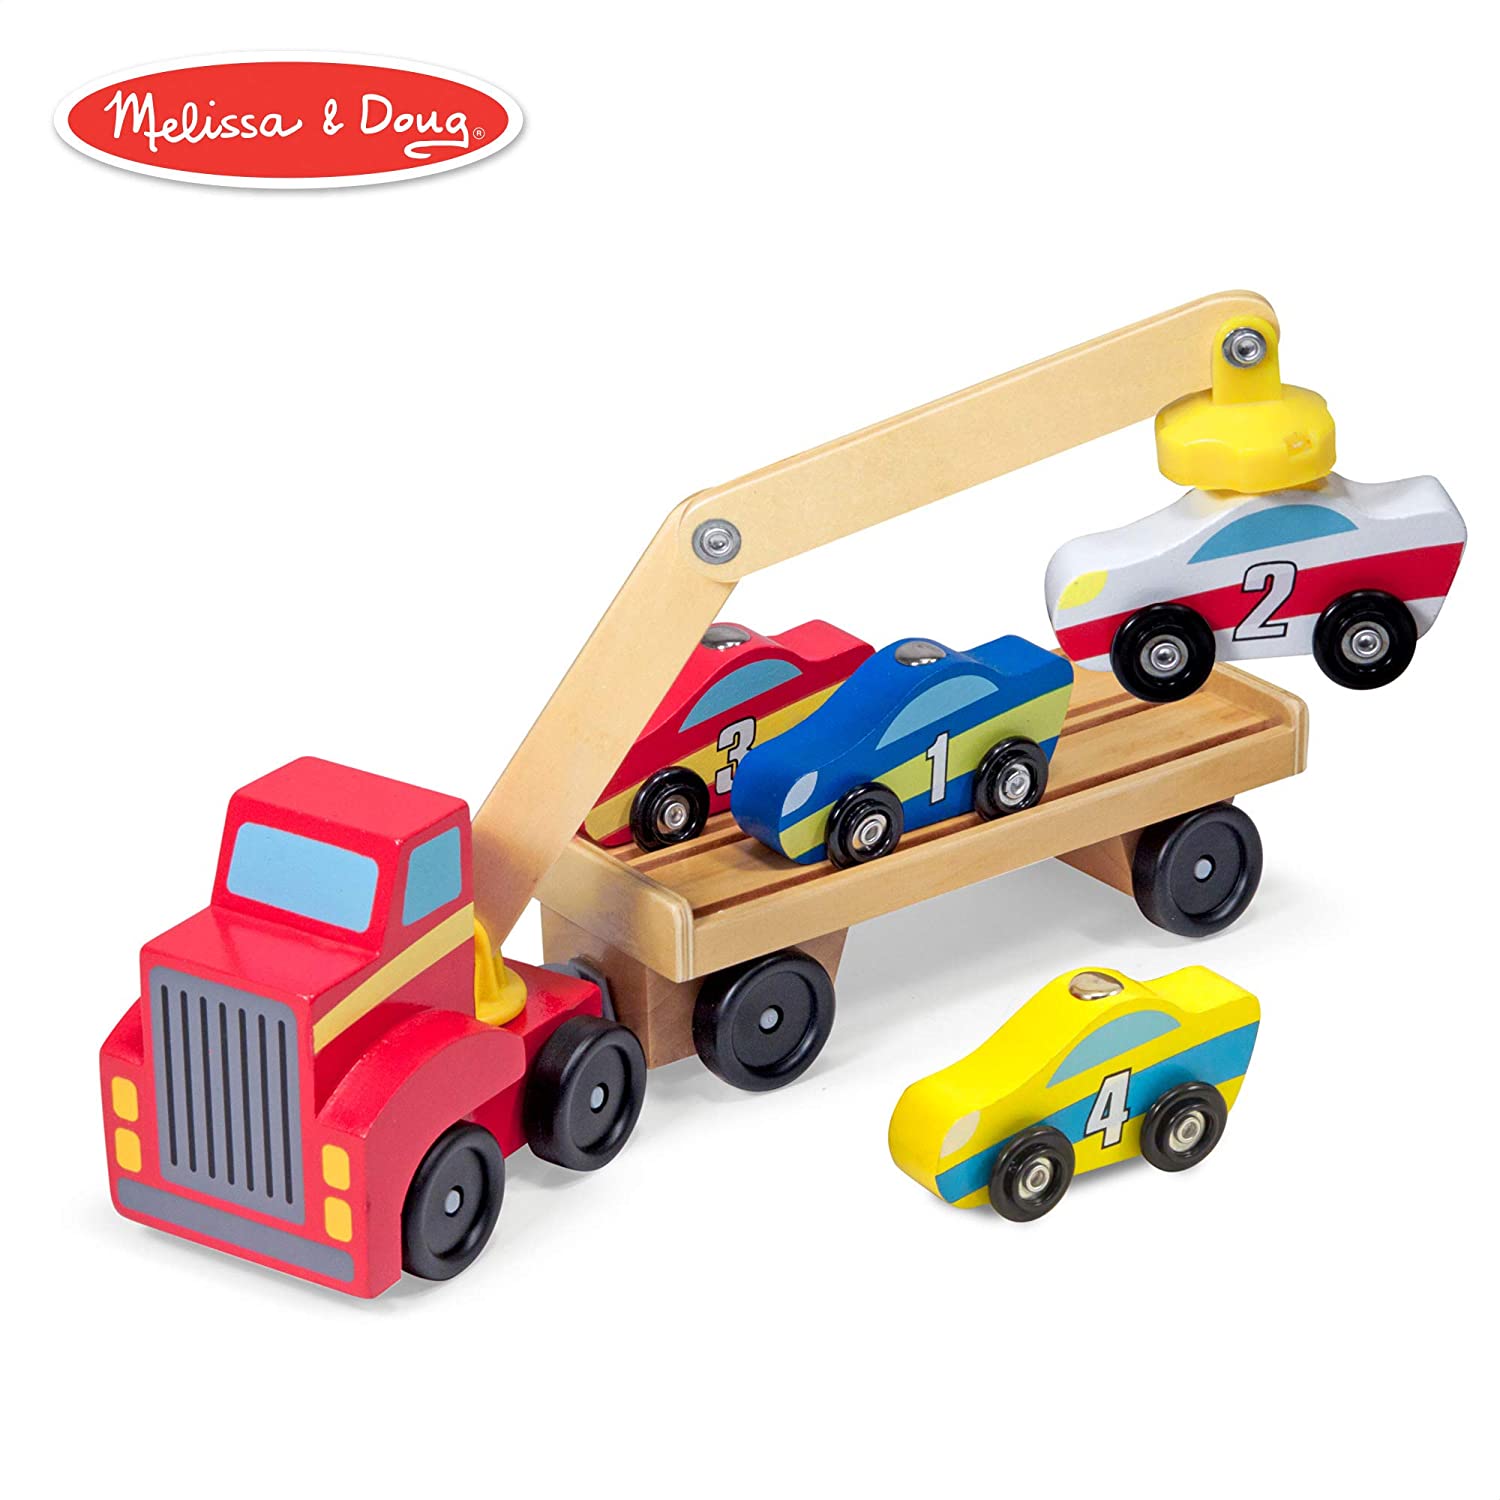 Melissa & Doug Magnetic Car Loader Wooden Toy Set, Cars & Trucks, Helps Develop Motor Skills, 4 Cars and 1 Semi-Trailer Truck, 5.75" H x 13" W x 3" L